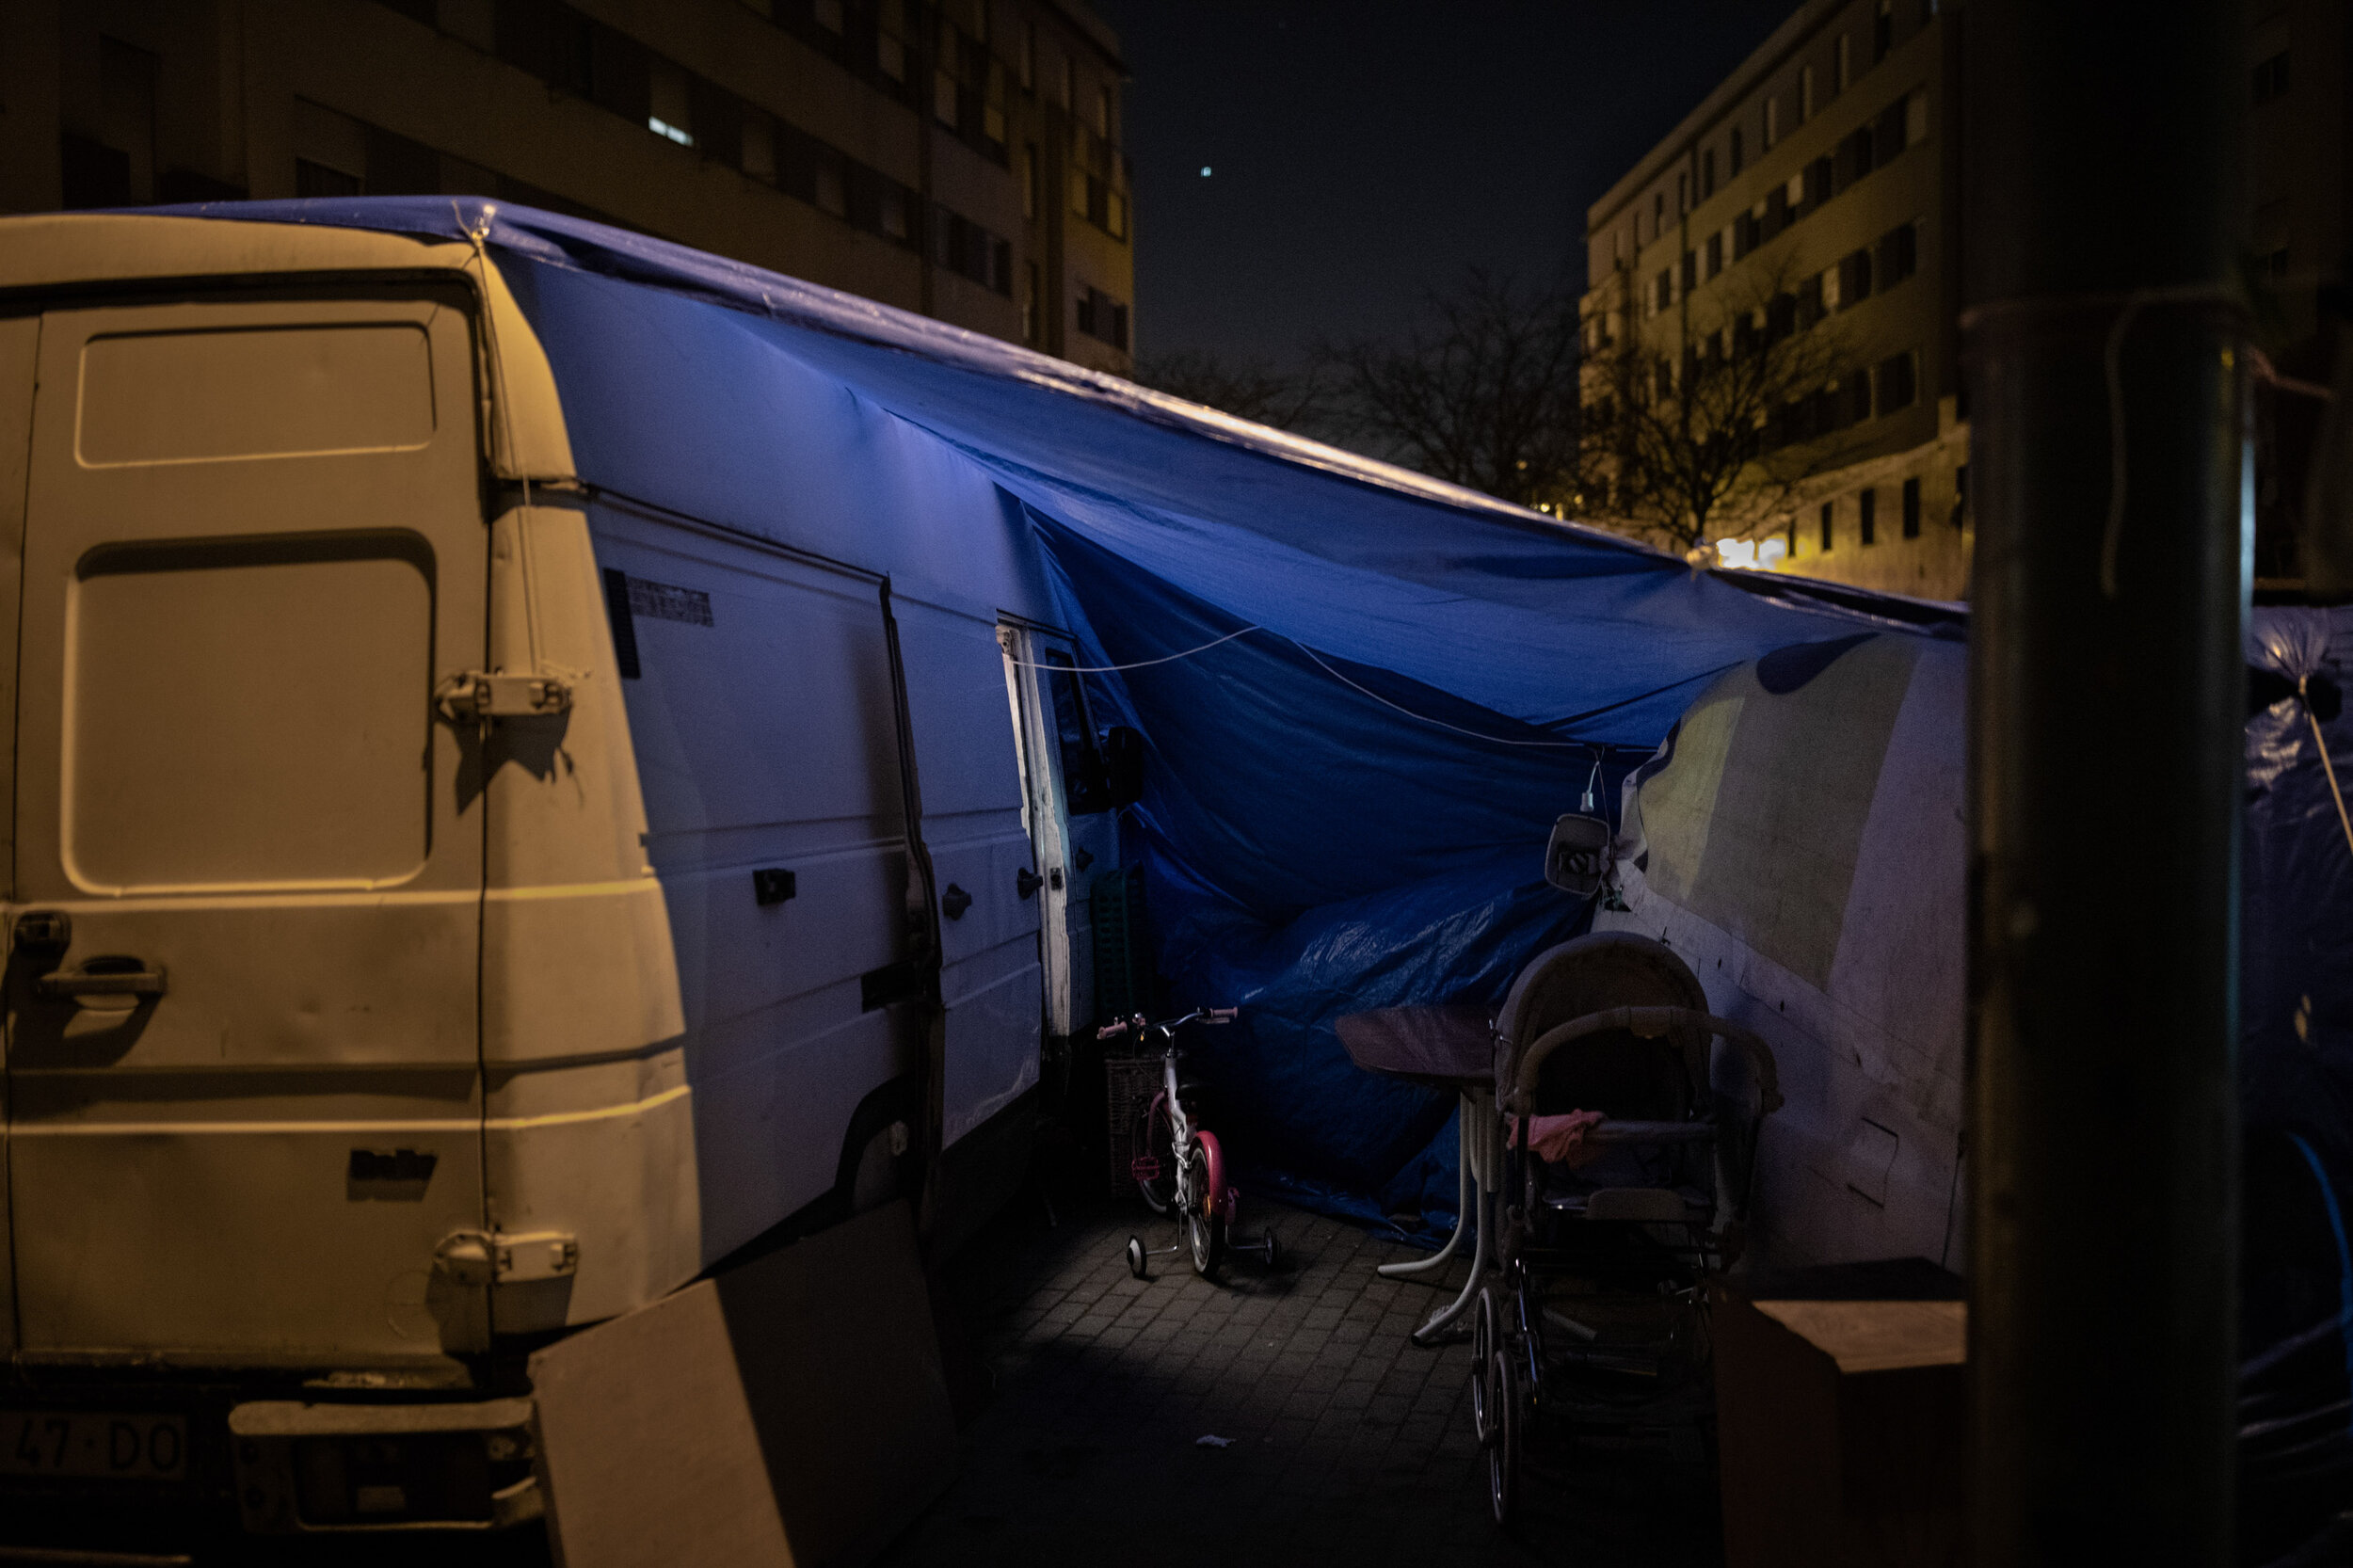  10th of March 2020   During the global Coronavirus outbreak, Lisbon's city hall evicted 13 families from the apartments they were squatting in Alfredo Bensaúde.    